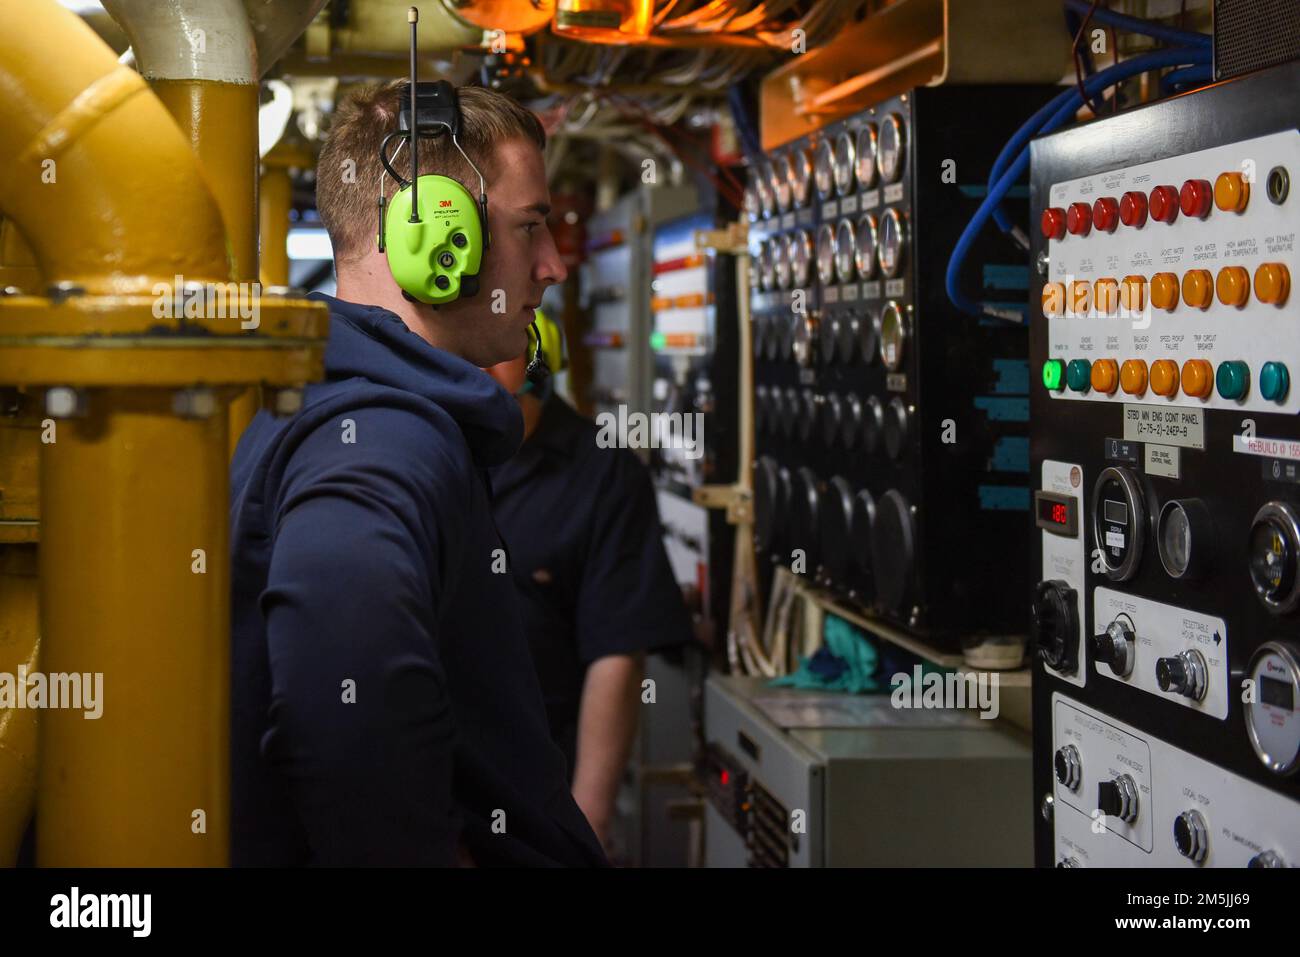 U.S. Coast Guard Petty Officer 3rd Class Michael Covey, a Machinery Technician aboard Coast Guard Cutter Spar, monitors the main starboard engine control panel while underway in the Atlantic Ocean, March 19, 2022. Spar and her crew are traveling to Duluth, Minn. after a year-long maintenance period in Baltimore. Stock Photo